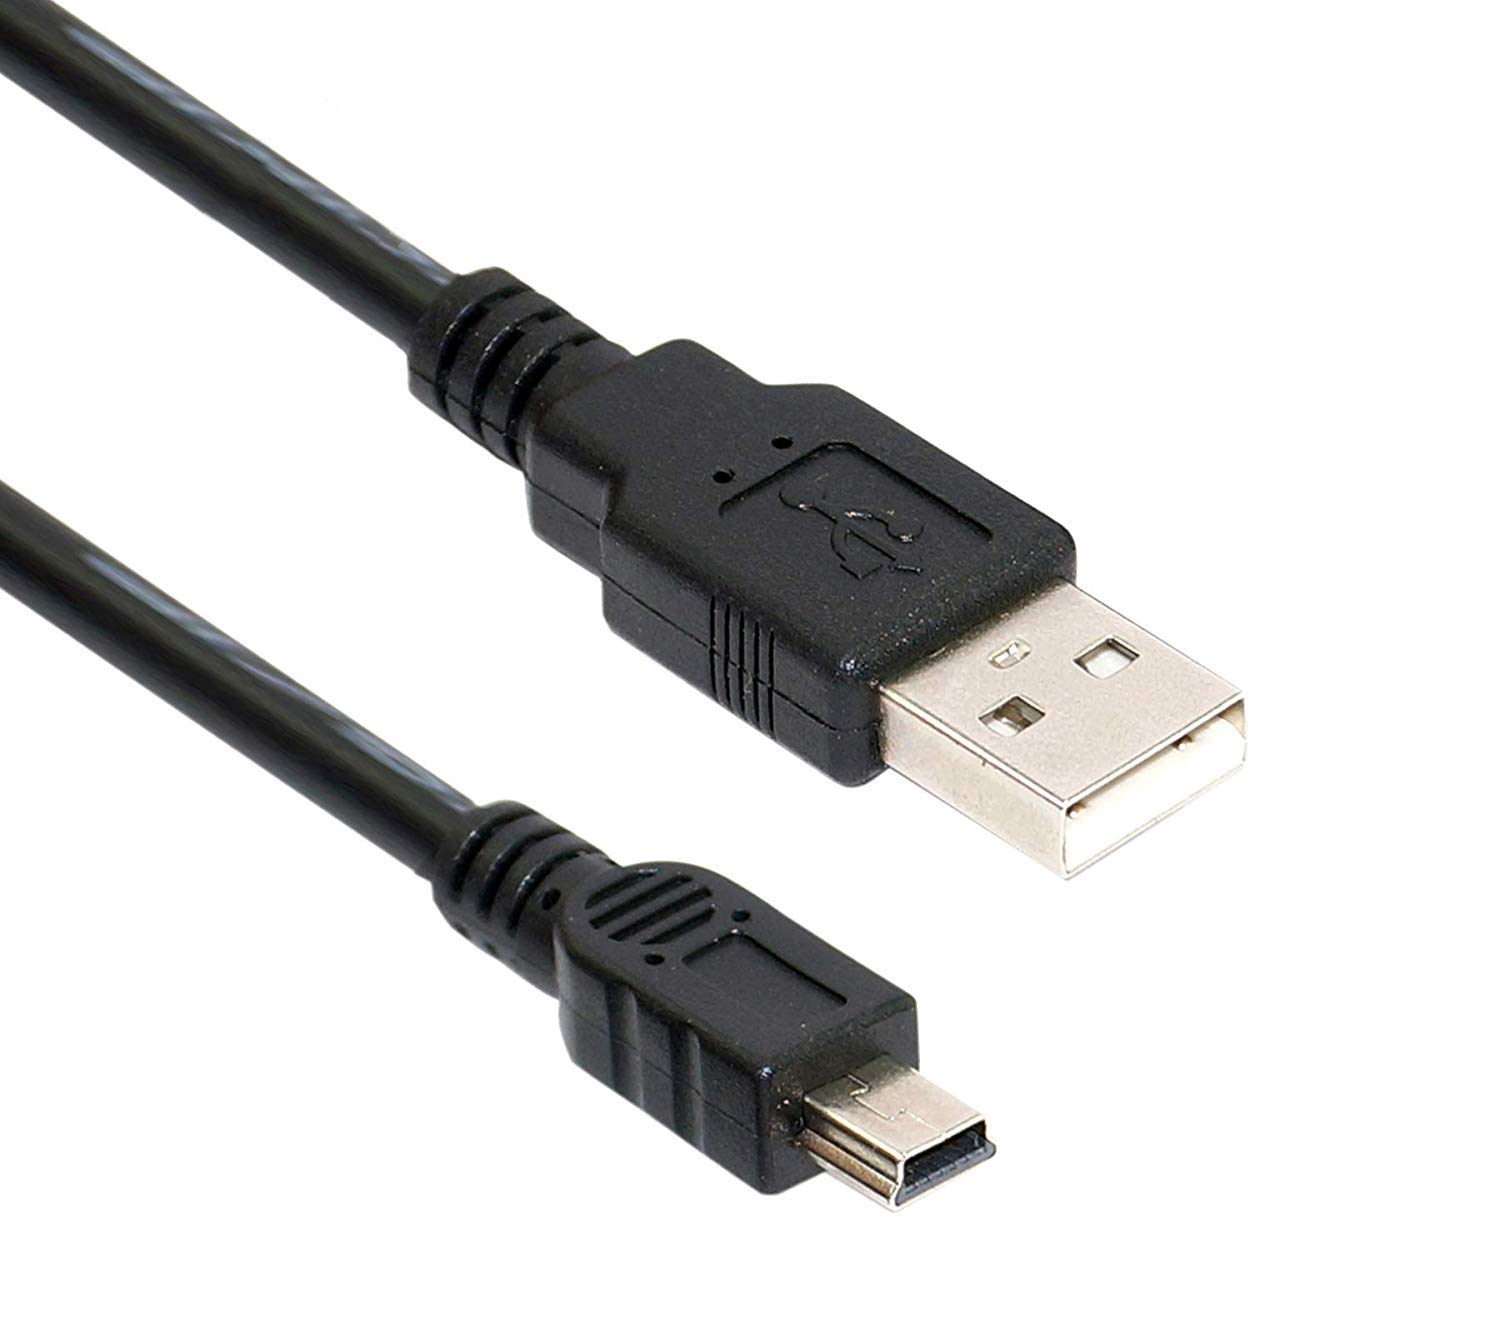 USB 2.0 A to USB 2.0MINI B Cable For Arduino Nano Online @ Best Price